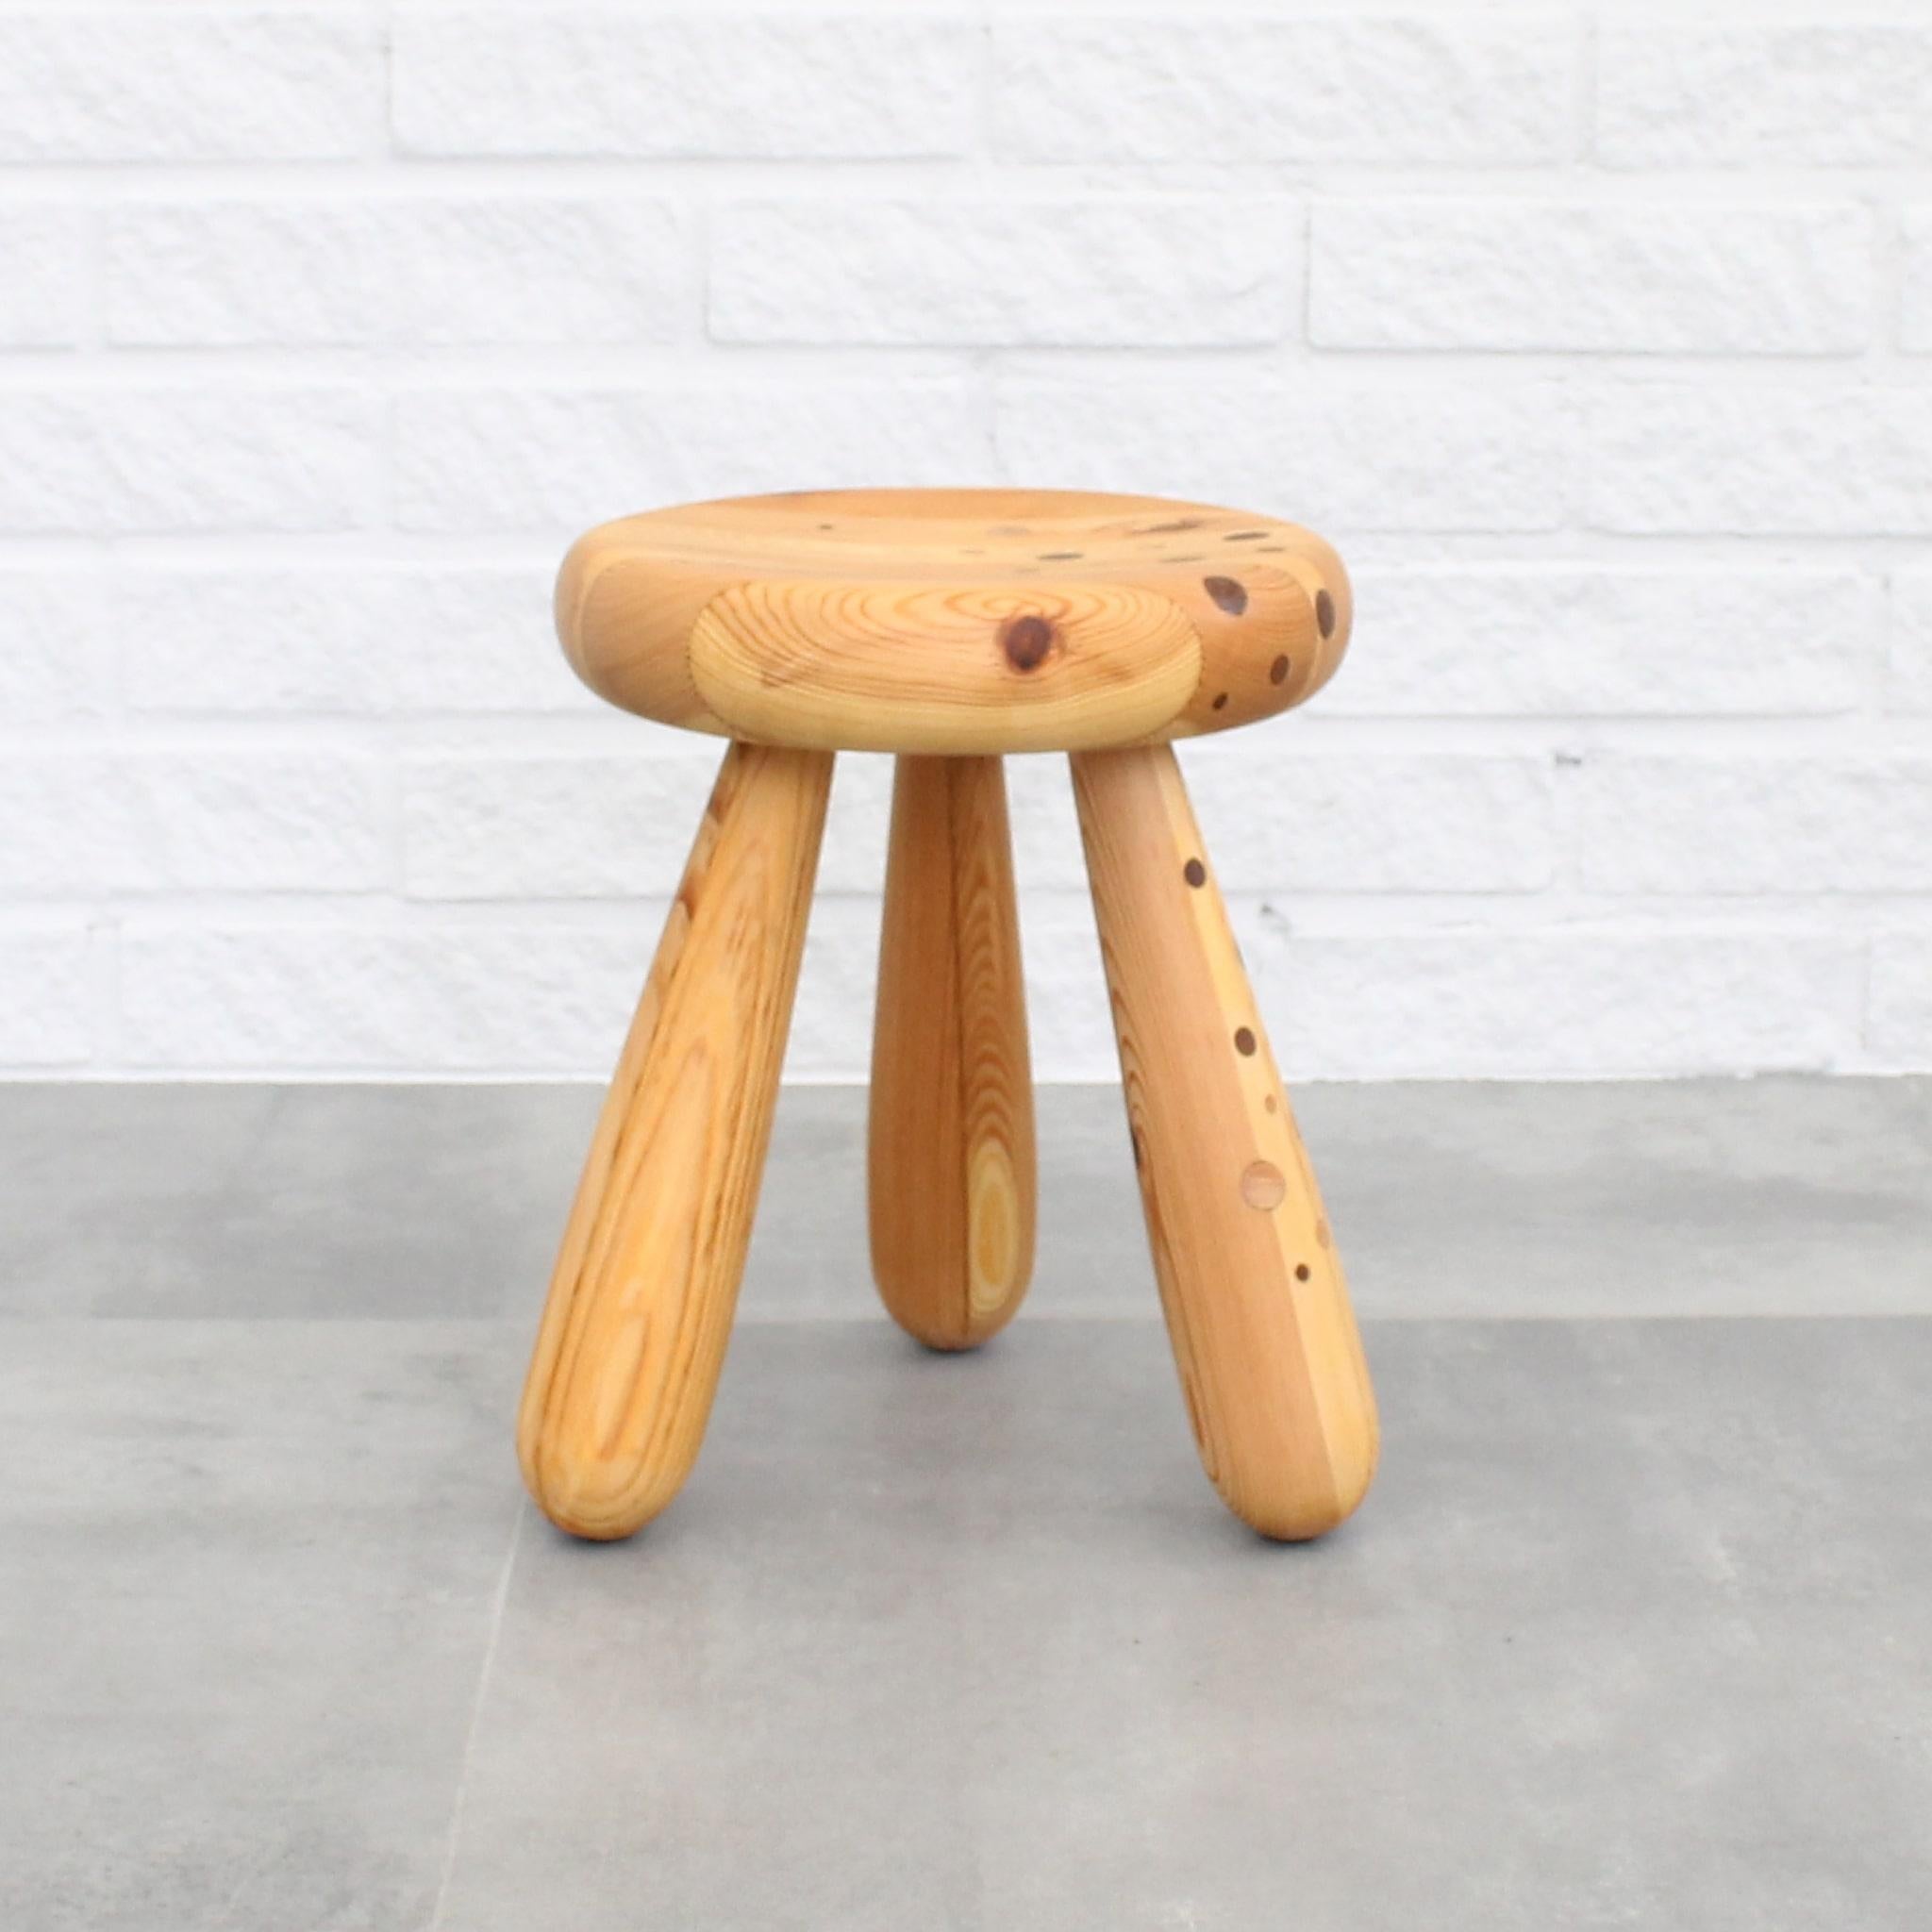 Swedish milking stool crafted from pine, with decorative dot shaped teak & oak inlays. Handcrafted by Andreas Zätterqvist in Sweden using traditional techniques and mainly local materials. This very piece was exhibited at the ‘Gjort är gjort”